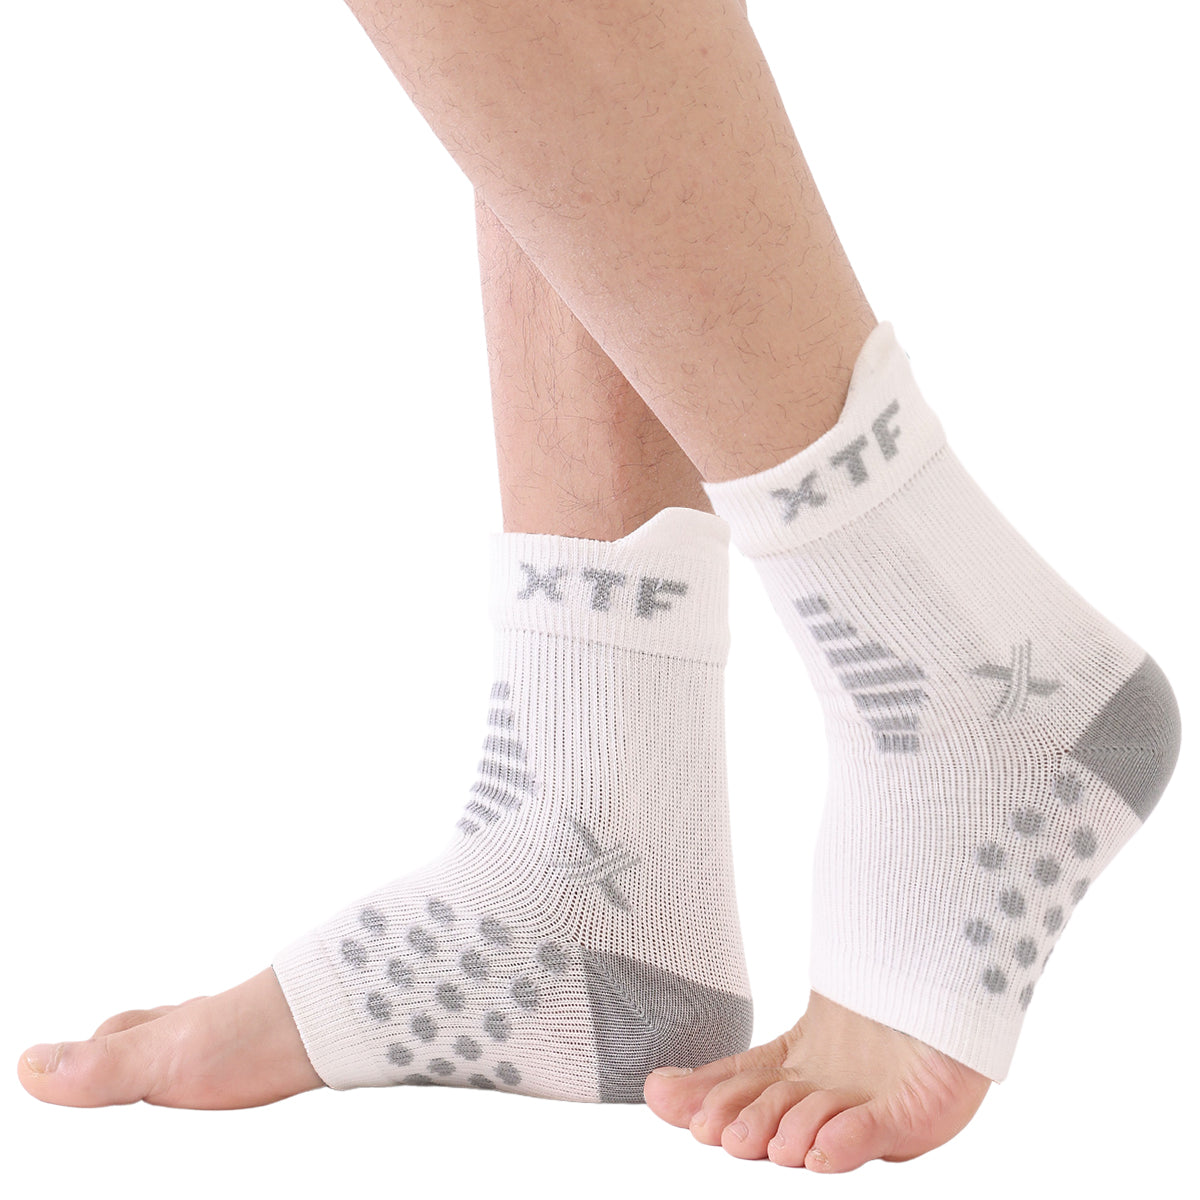 Targeted Compression Ankle Sleeves